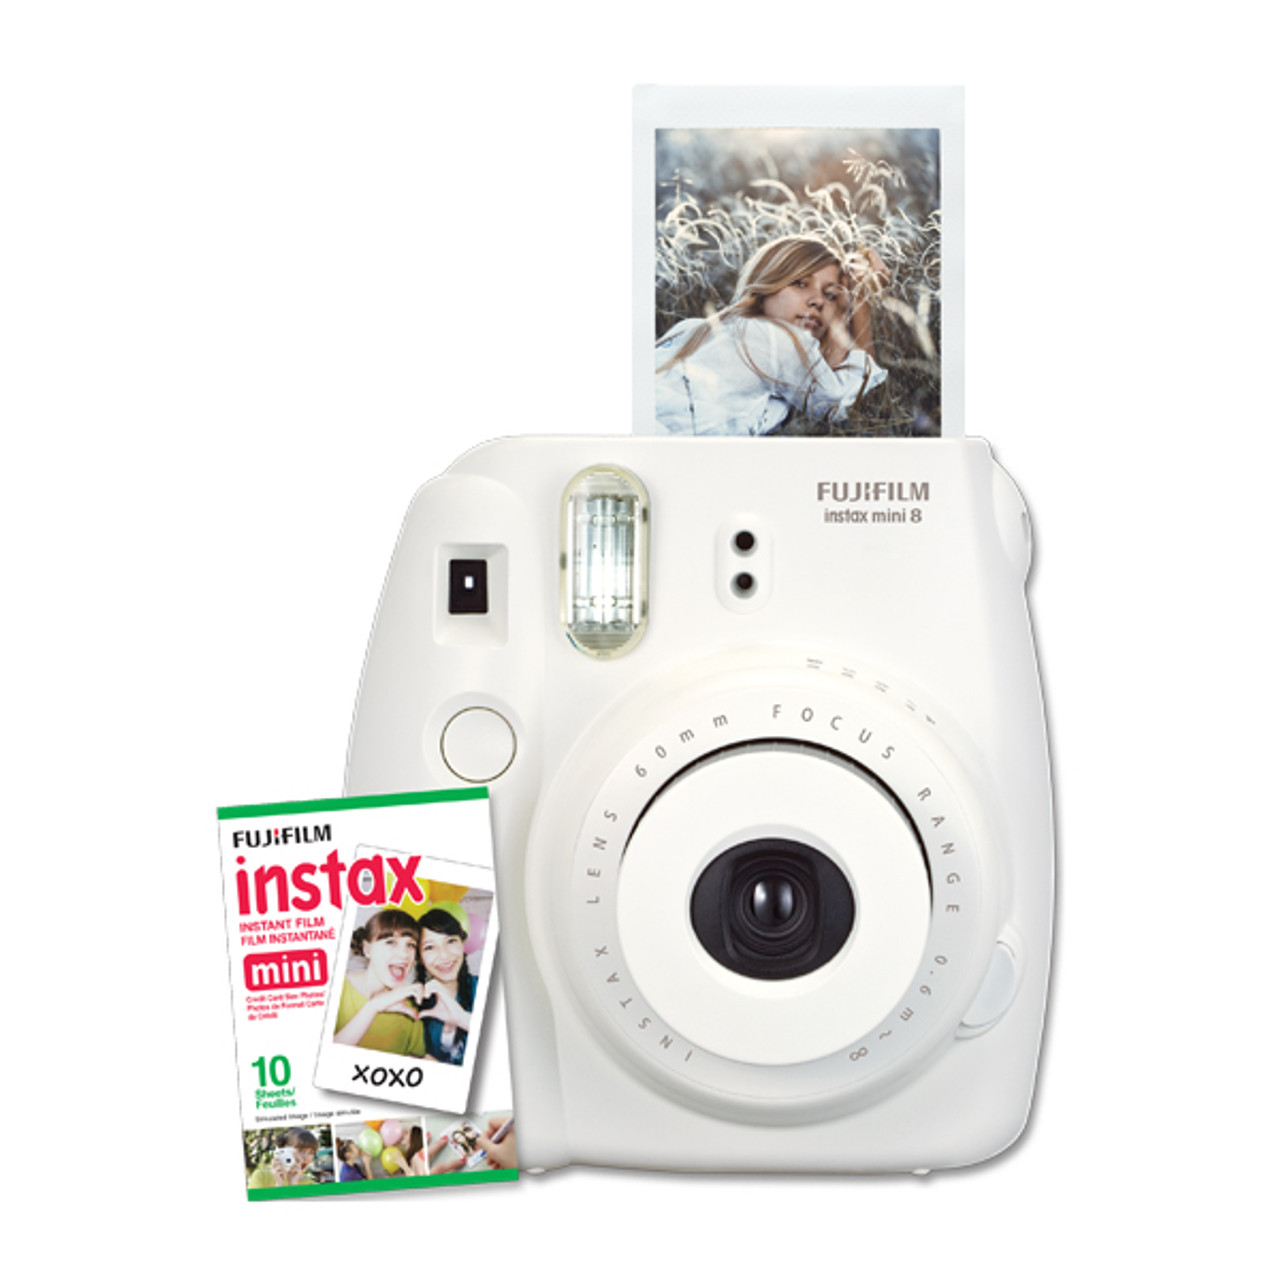 https://cdn11.bigcommerce.com/s-745x53acpn/images/stencil/1280x1280/products/5405/7421/fujifilm-instax-mini-8-white-with-1-pack-film-10-exposures__26772.1594071211.jpg?c=2